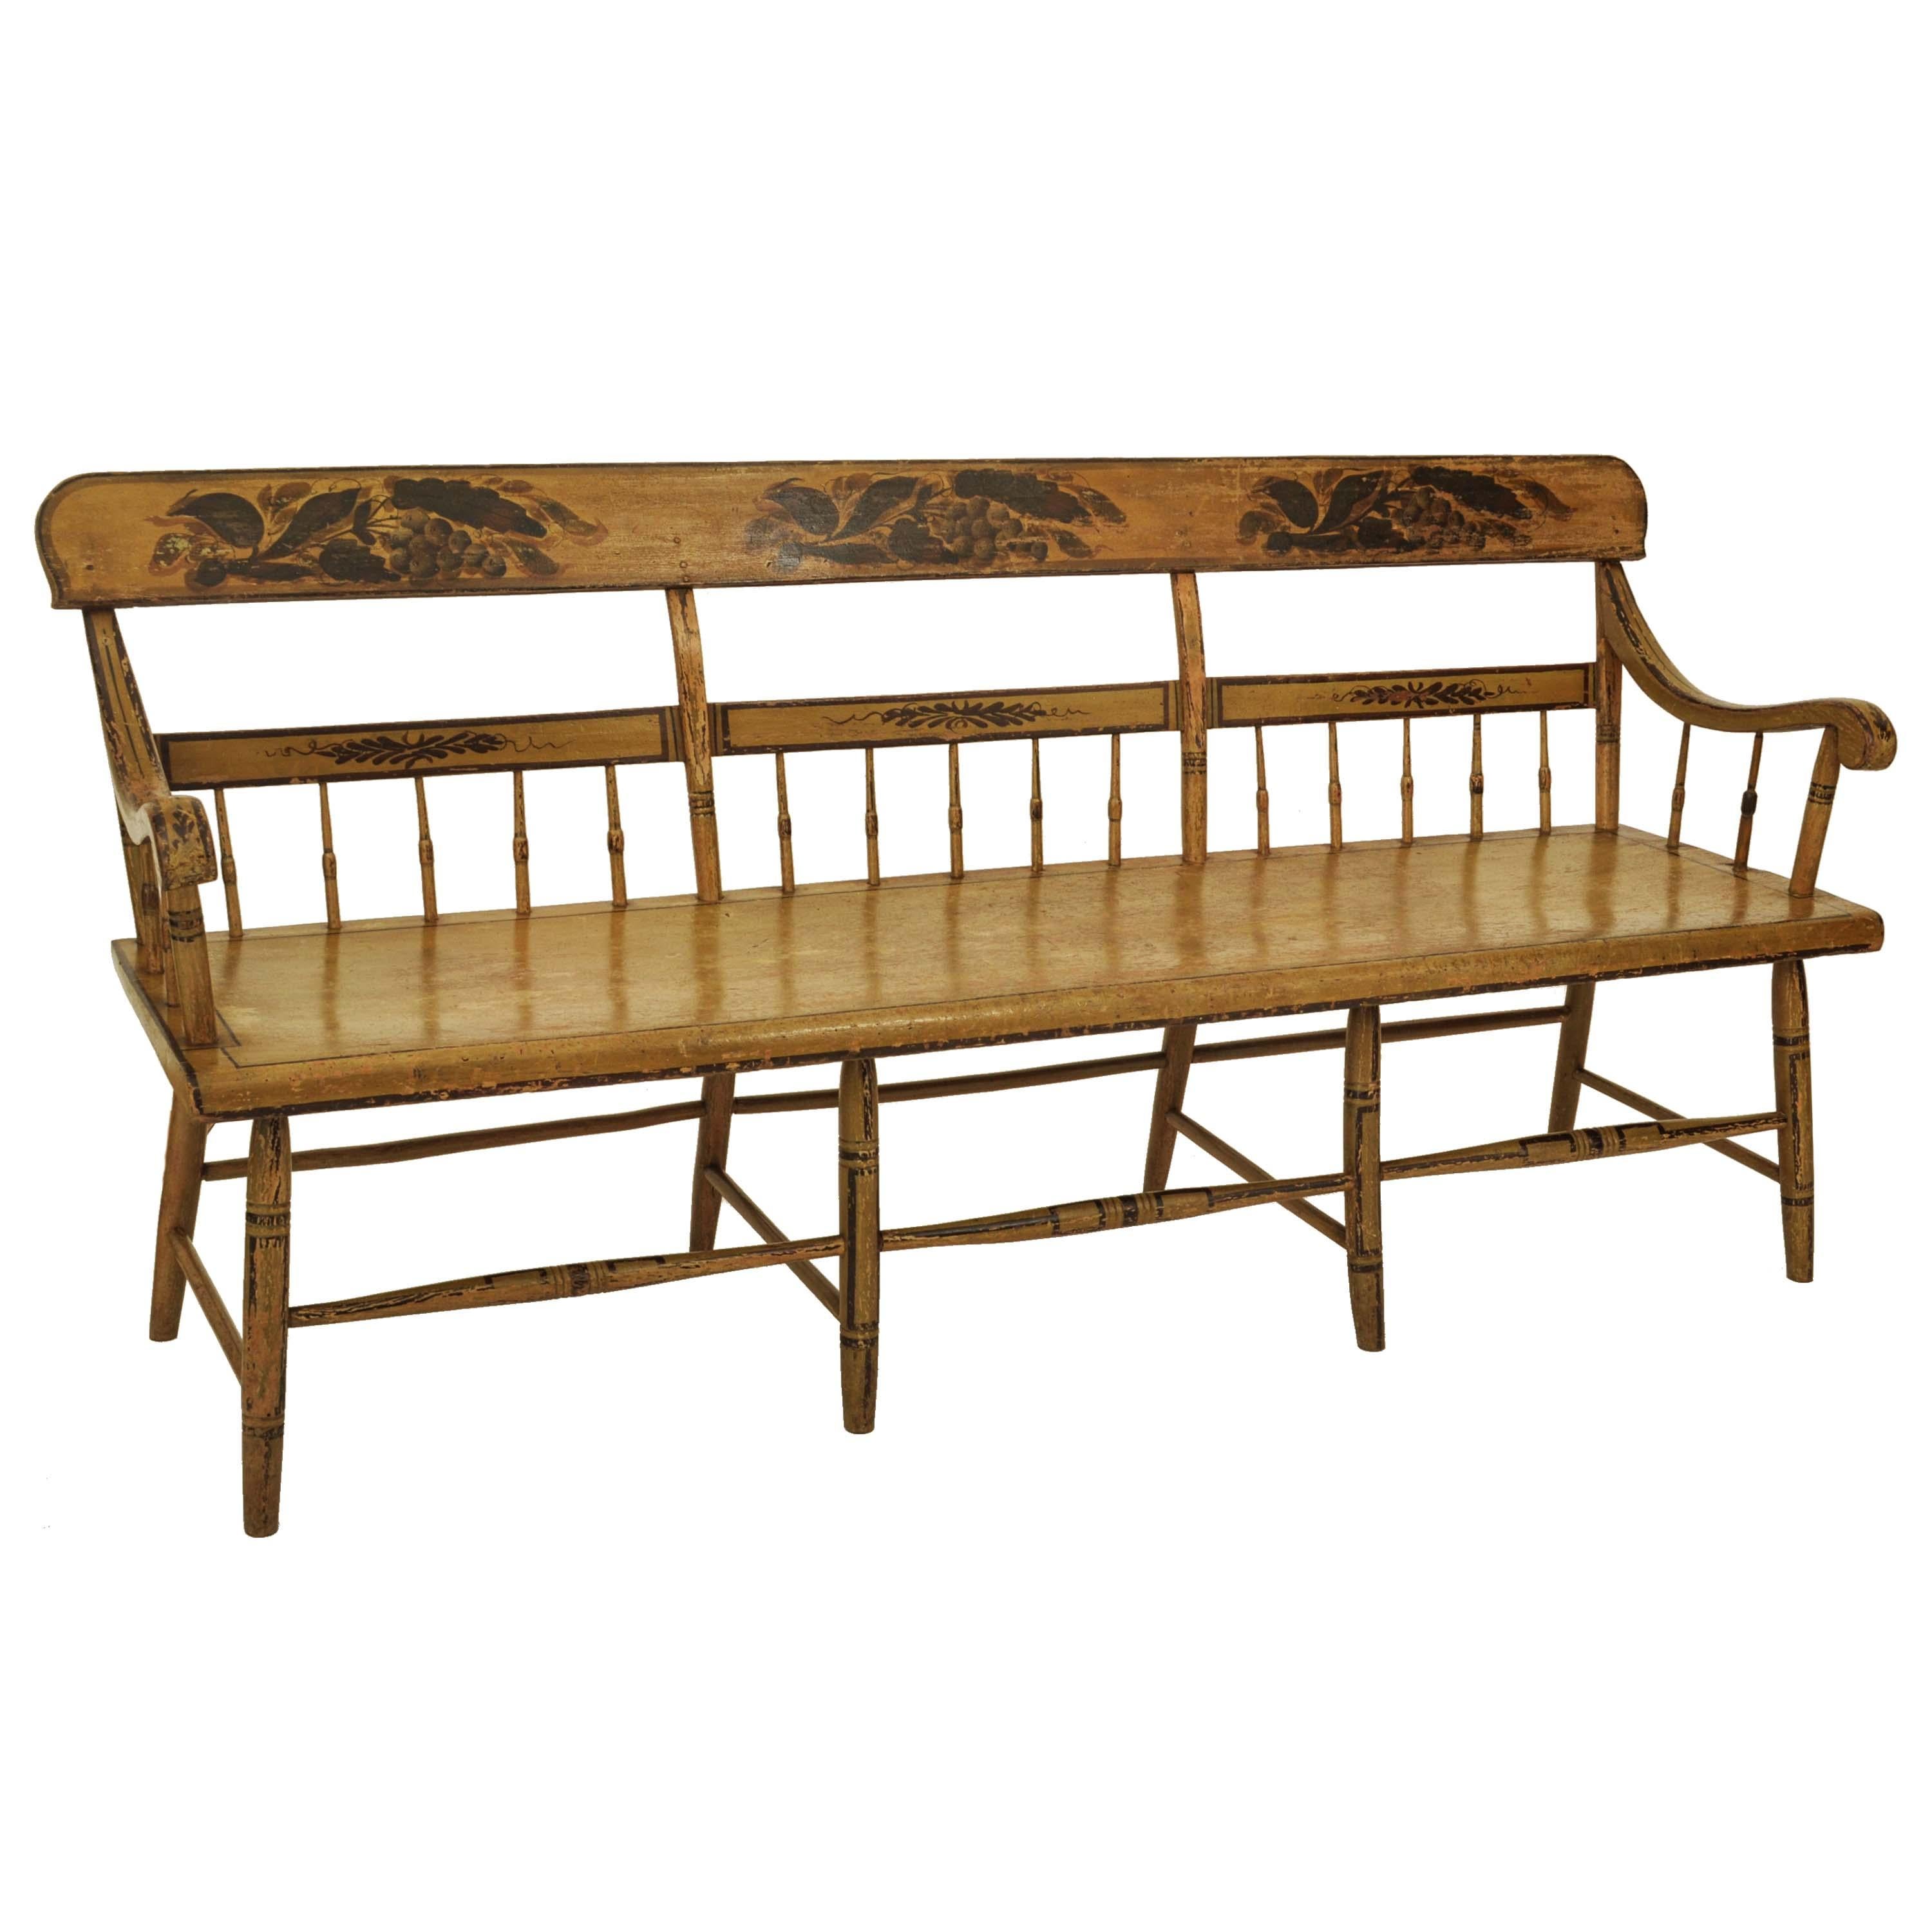 Fine & rare antique American half-spindled Federal period painted & stenciled Windsor bench/settee, Baltimore, Circa 1820.
A rare bench with the original chrome yellow painted and grapevine stenciling, the back rest with three grapevine painted